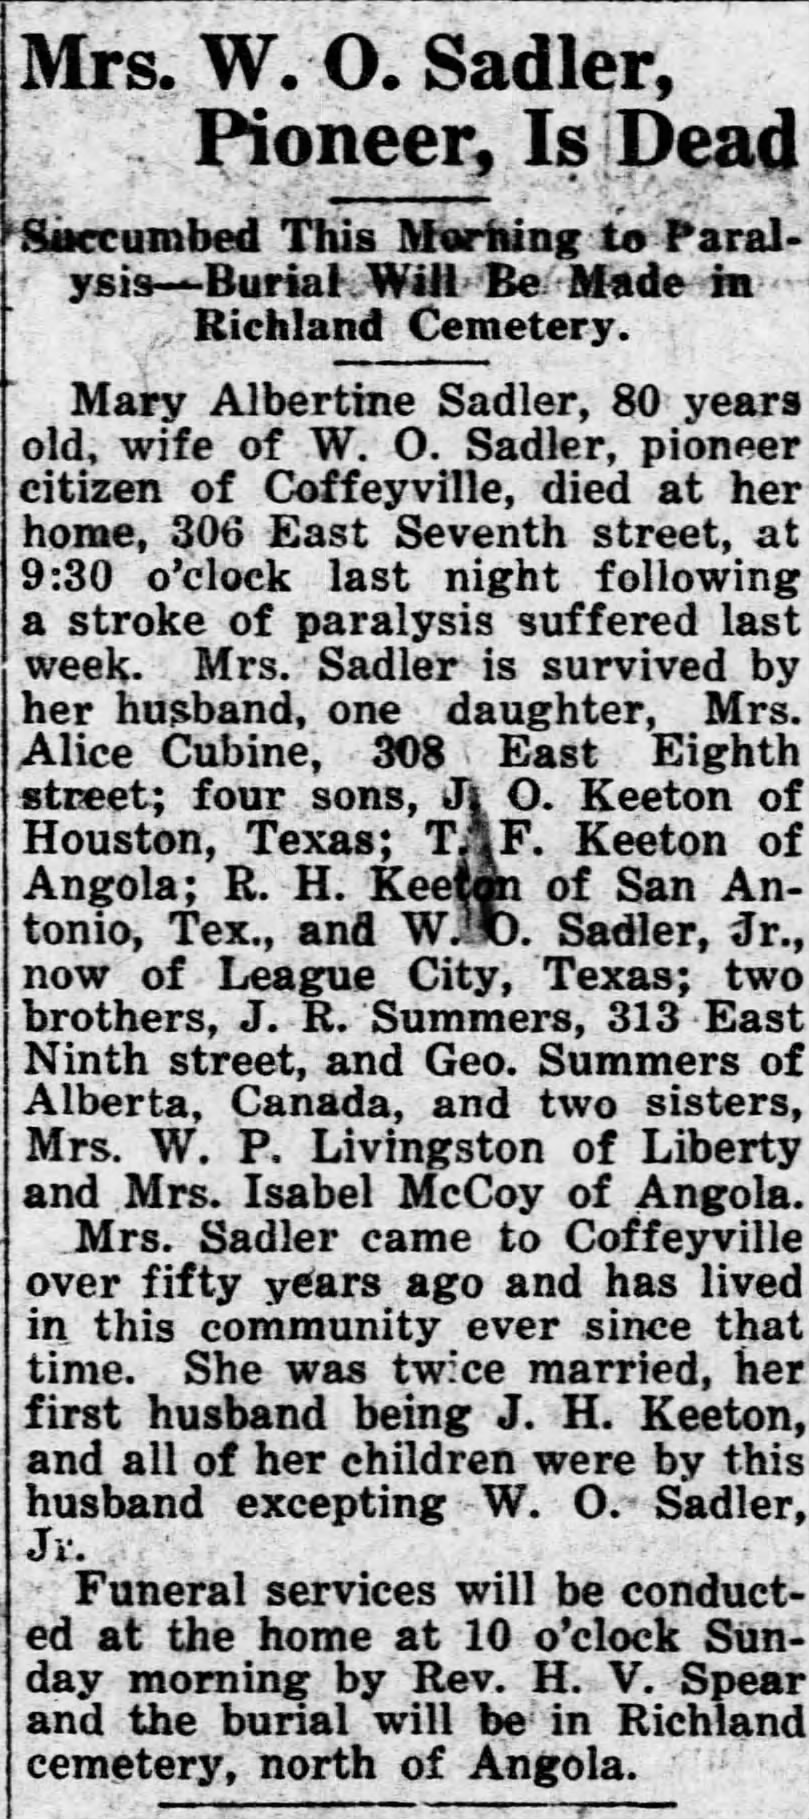 The Coffeyville Daily Journal  11 Aug 1922